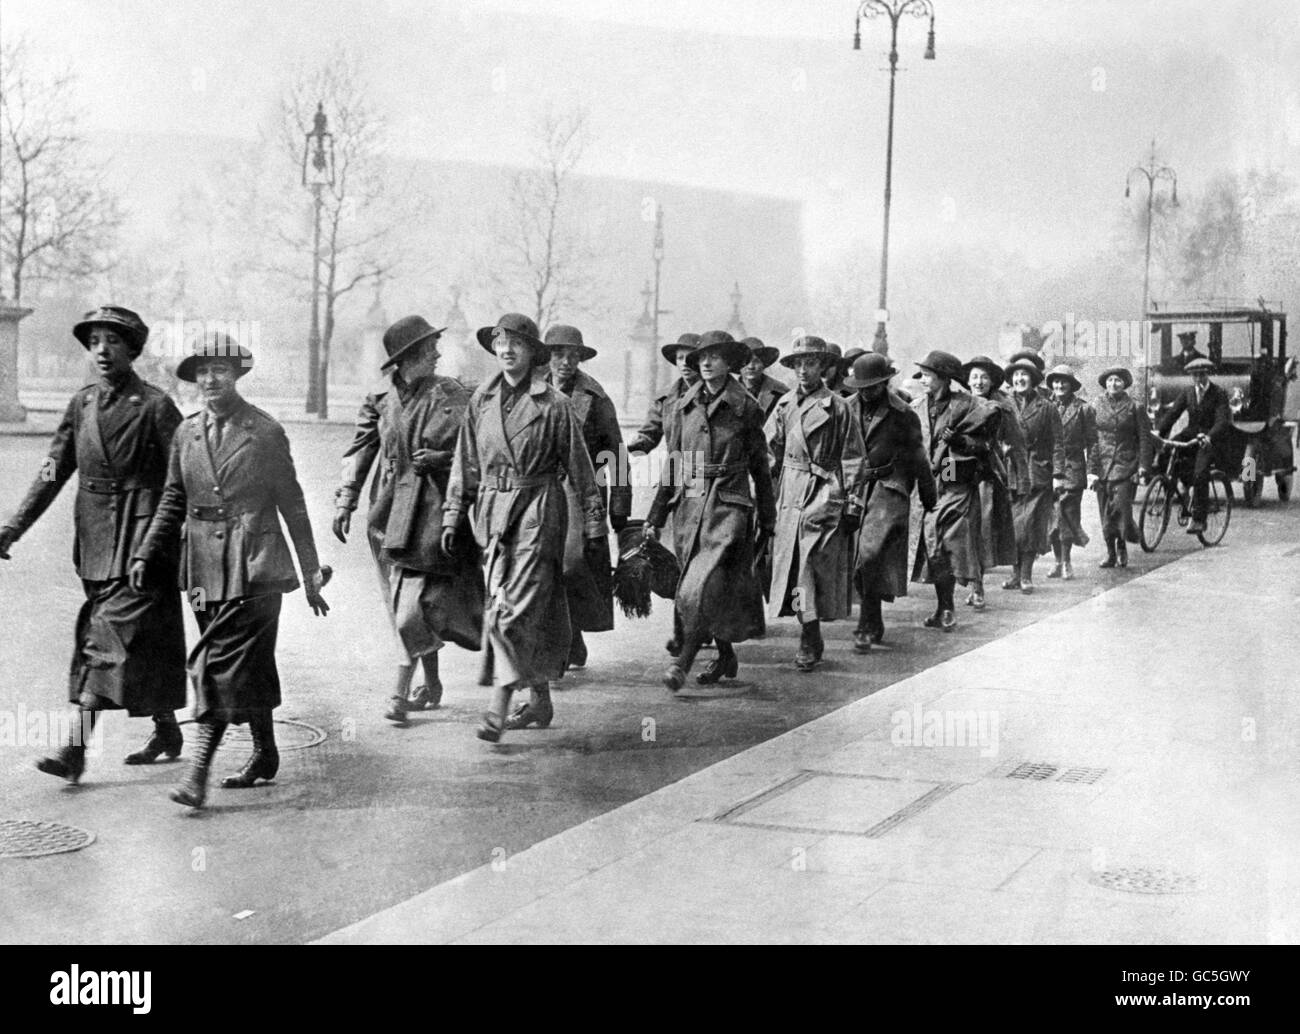 MEMBERS OF THE W.A.A.C. MARCHING ALONG A STREET DURING THE 1914-1918 WAR. Stock Photo